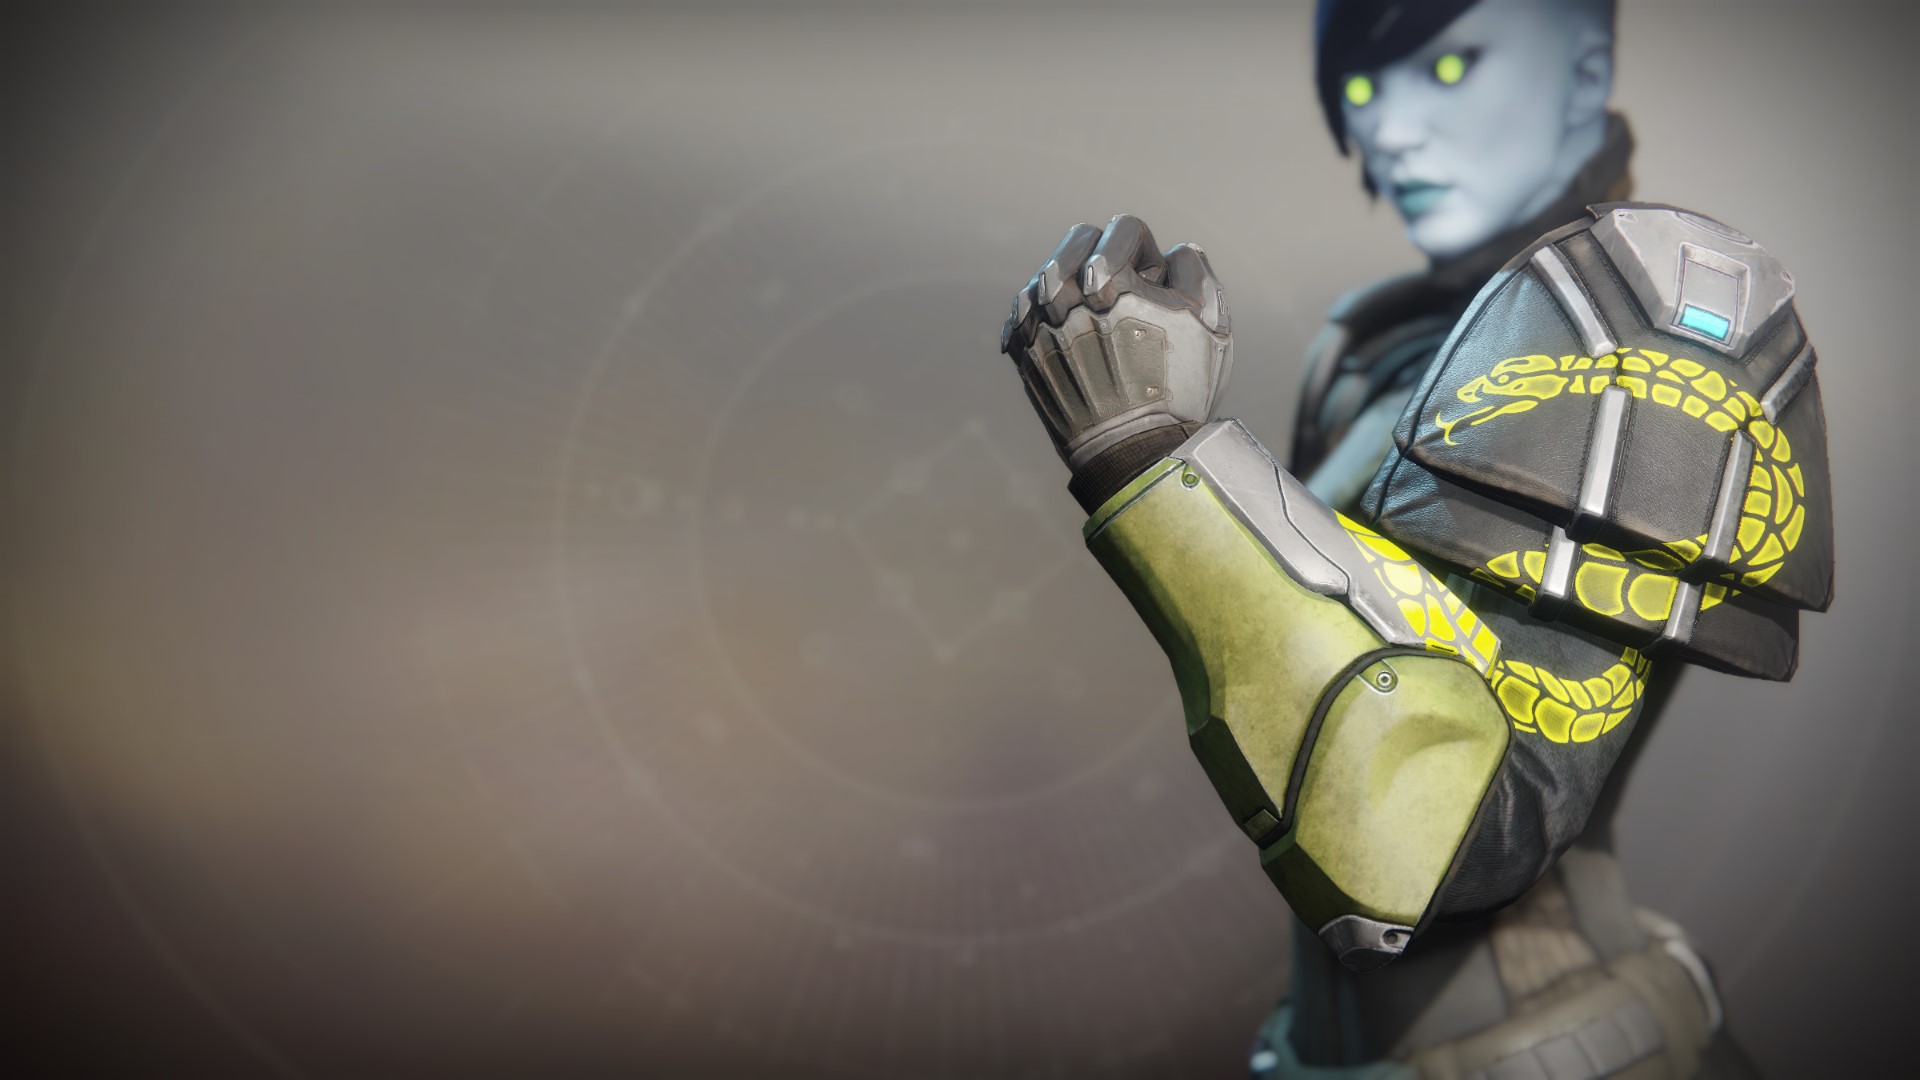 An in-game render of the Illicit Sentry Gauntlets.